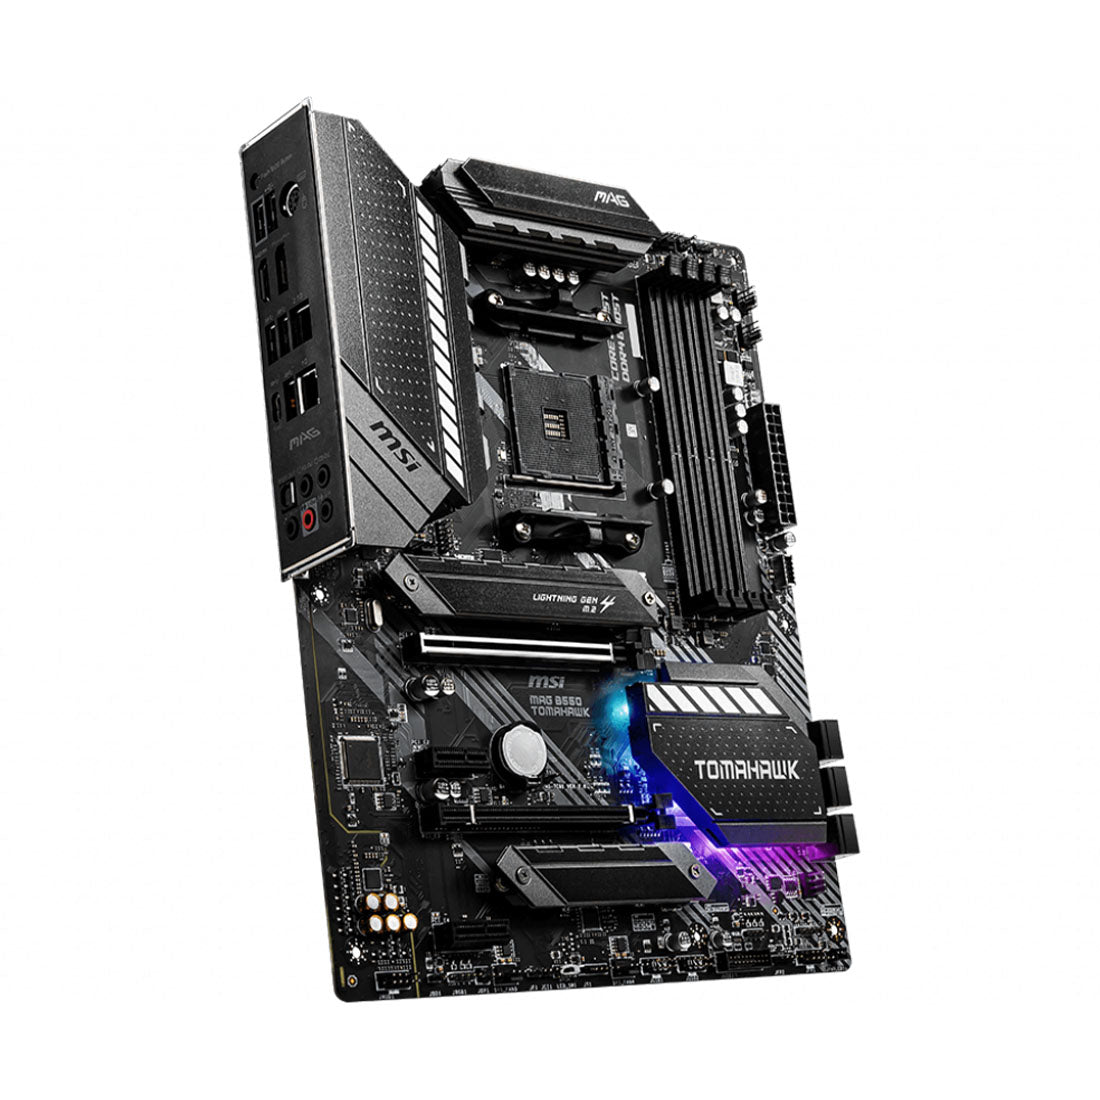 MSI MAG B550 TOMAHAWK ATX AMD AM4 Motherboard with PCIe 4.0 USB-C and 2.5G LAN